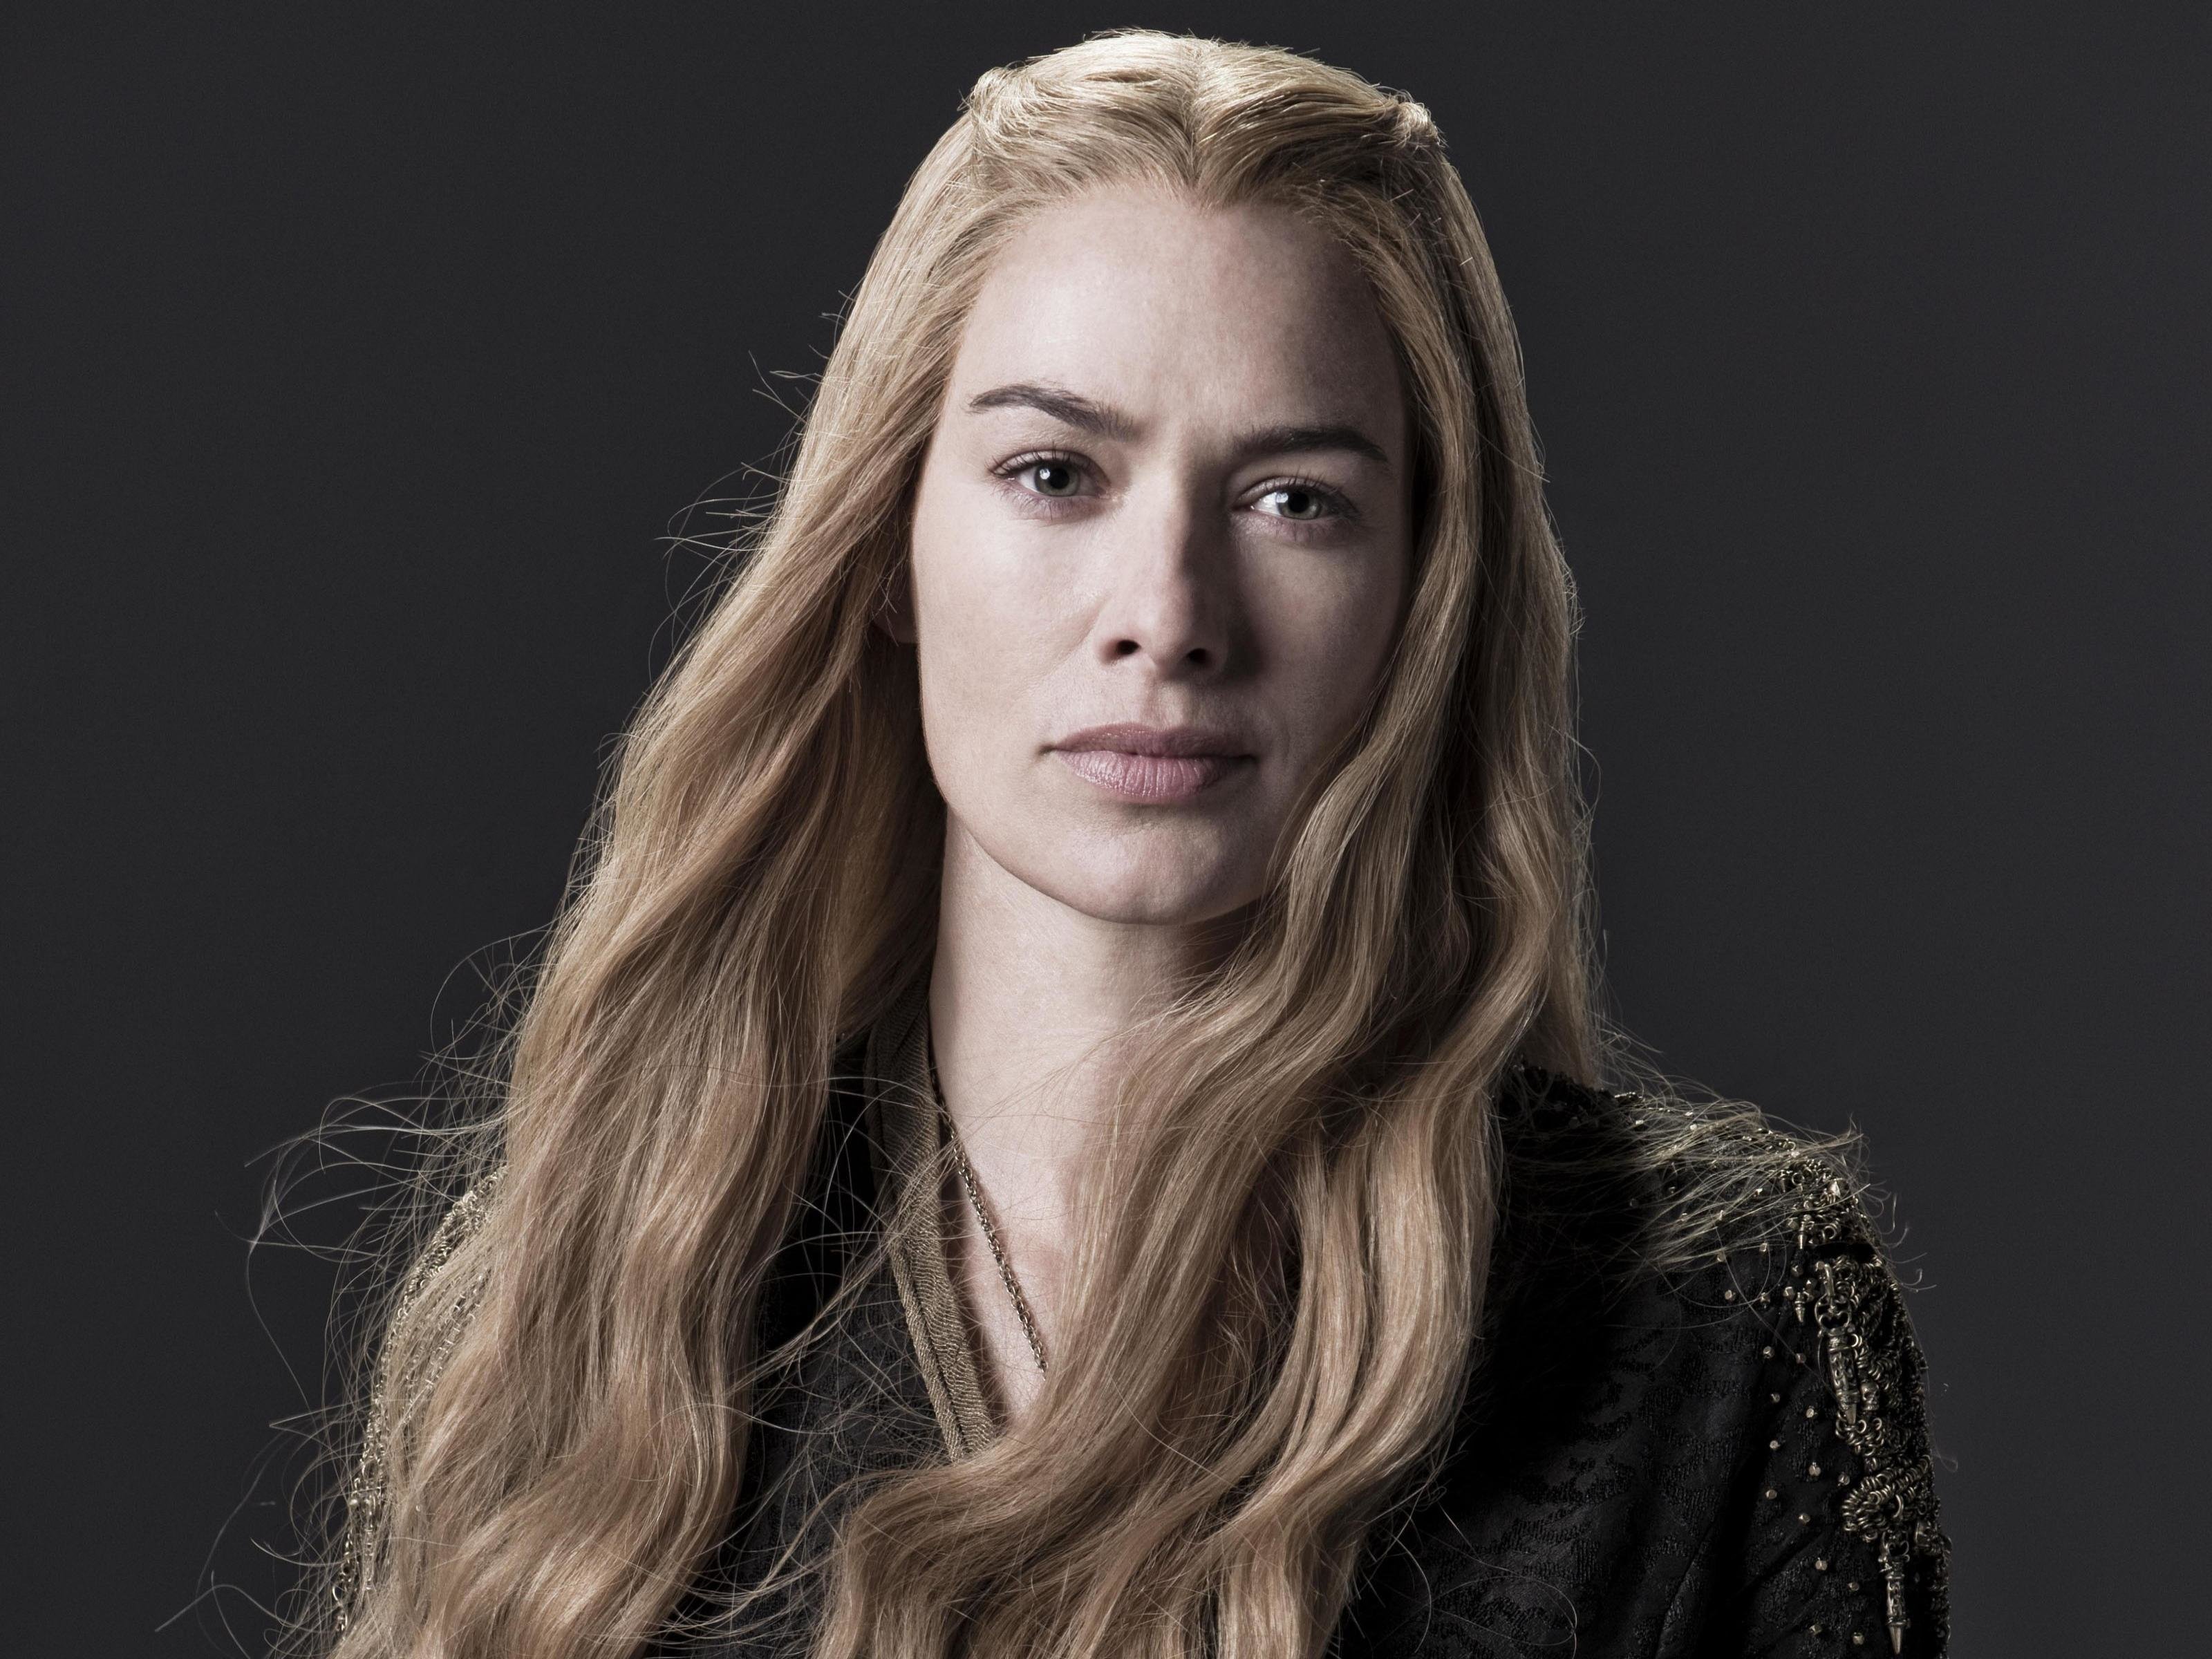 Cersei Lannister Wallpapers Hd For Desktop Backgrounds Images, Photos, Reviews